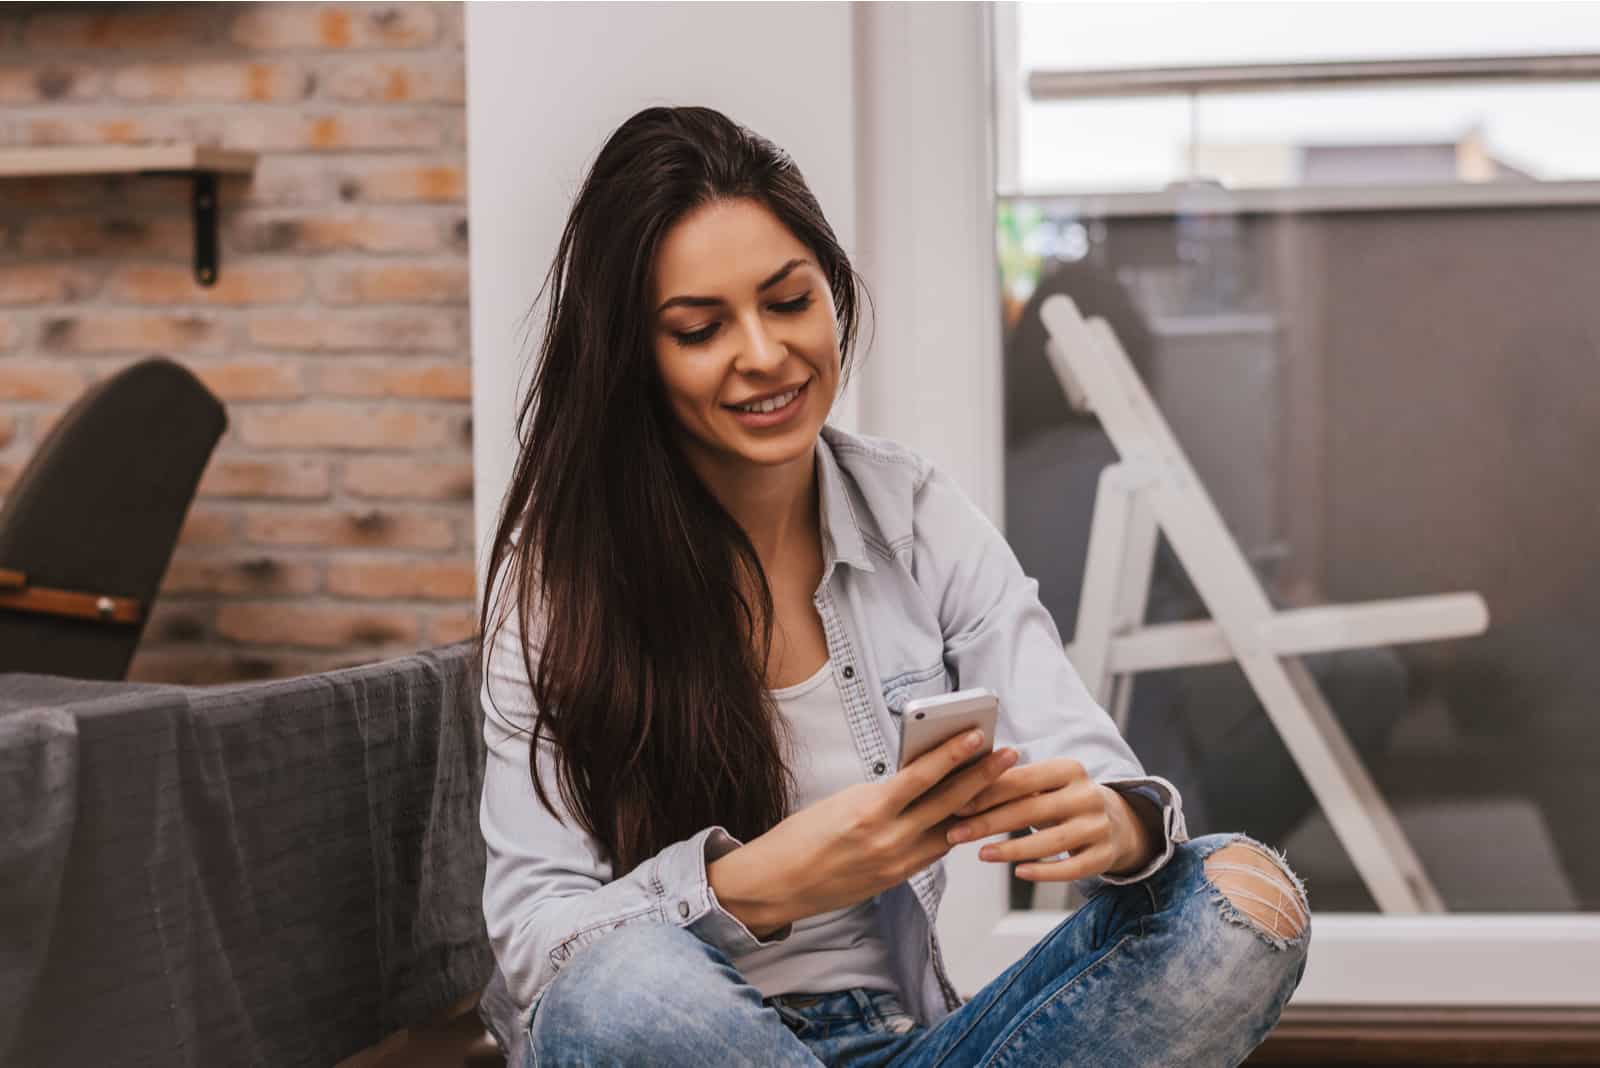 a woman with long brown hair is sitting on the couch holding a cell phone in her hand